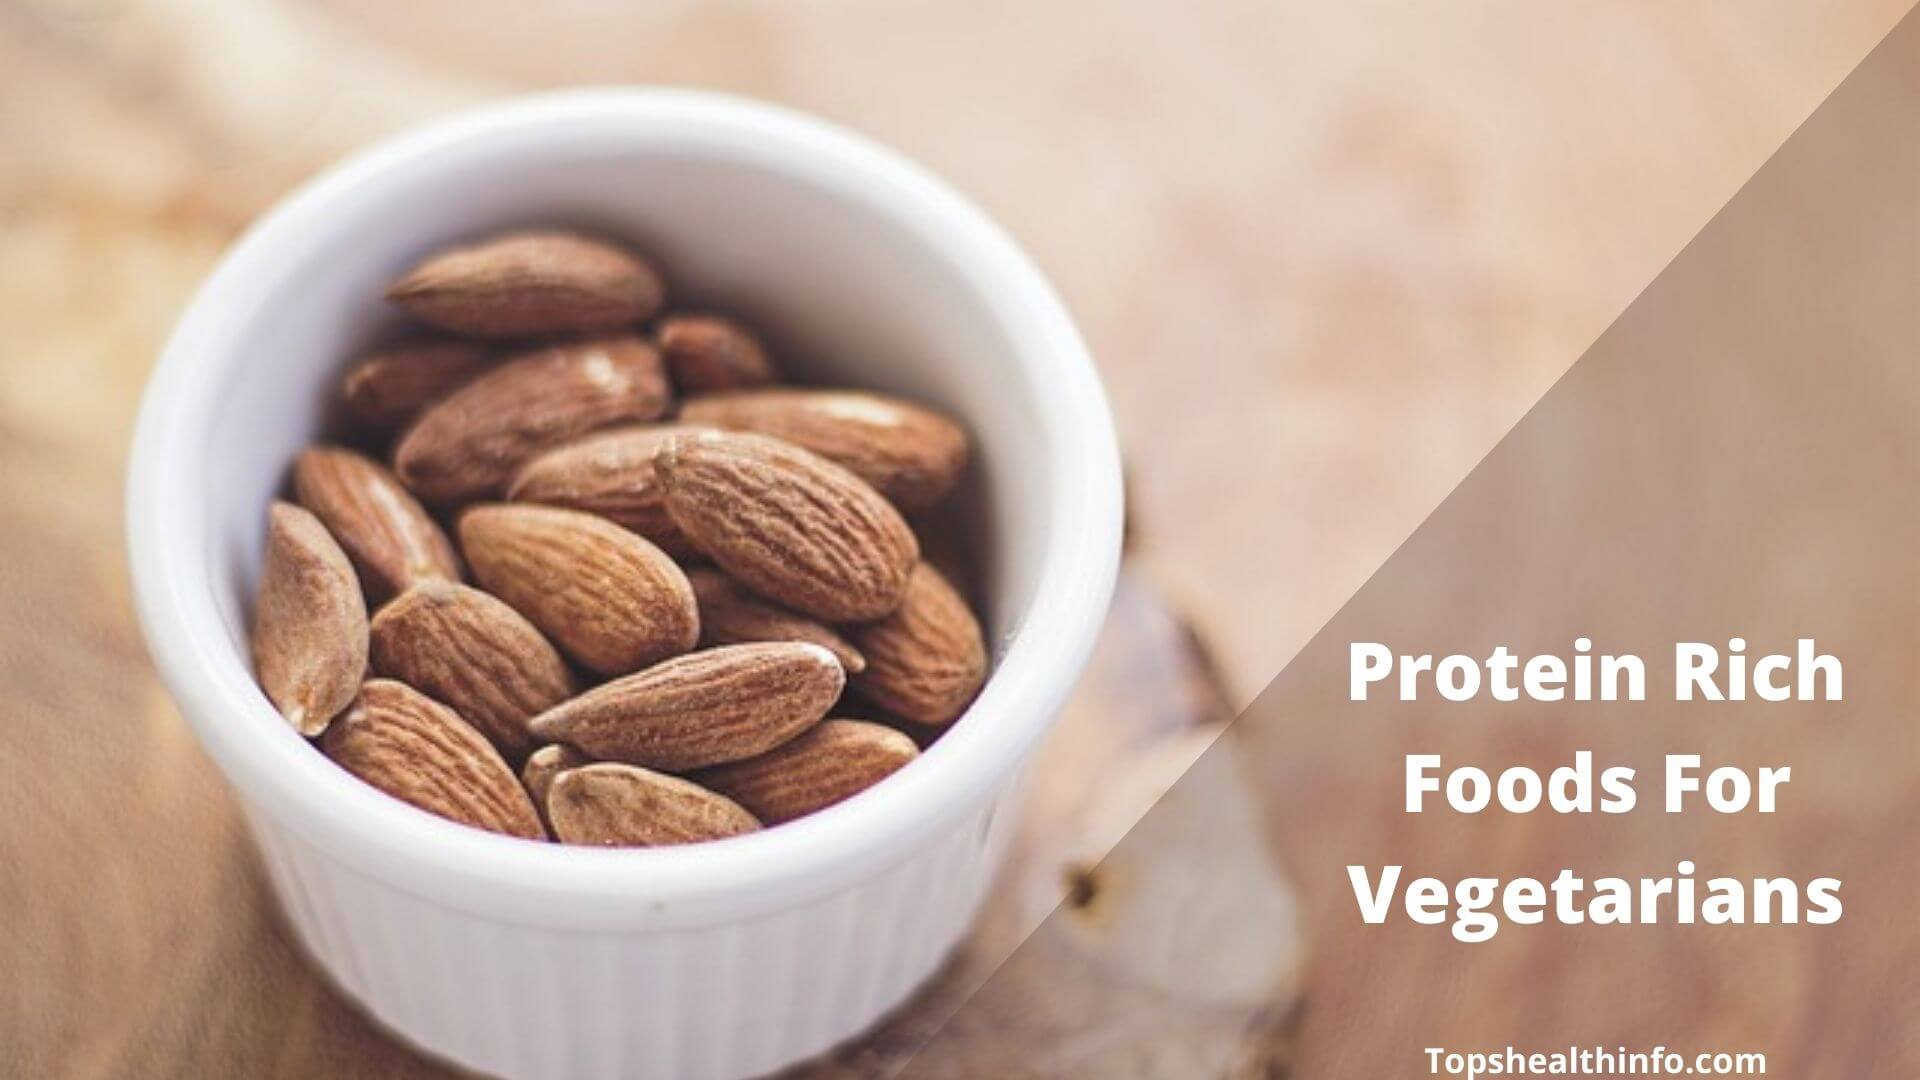 Protein Rich Foods For Vegetarians - Tops Health Info